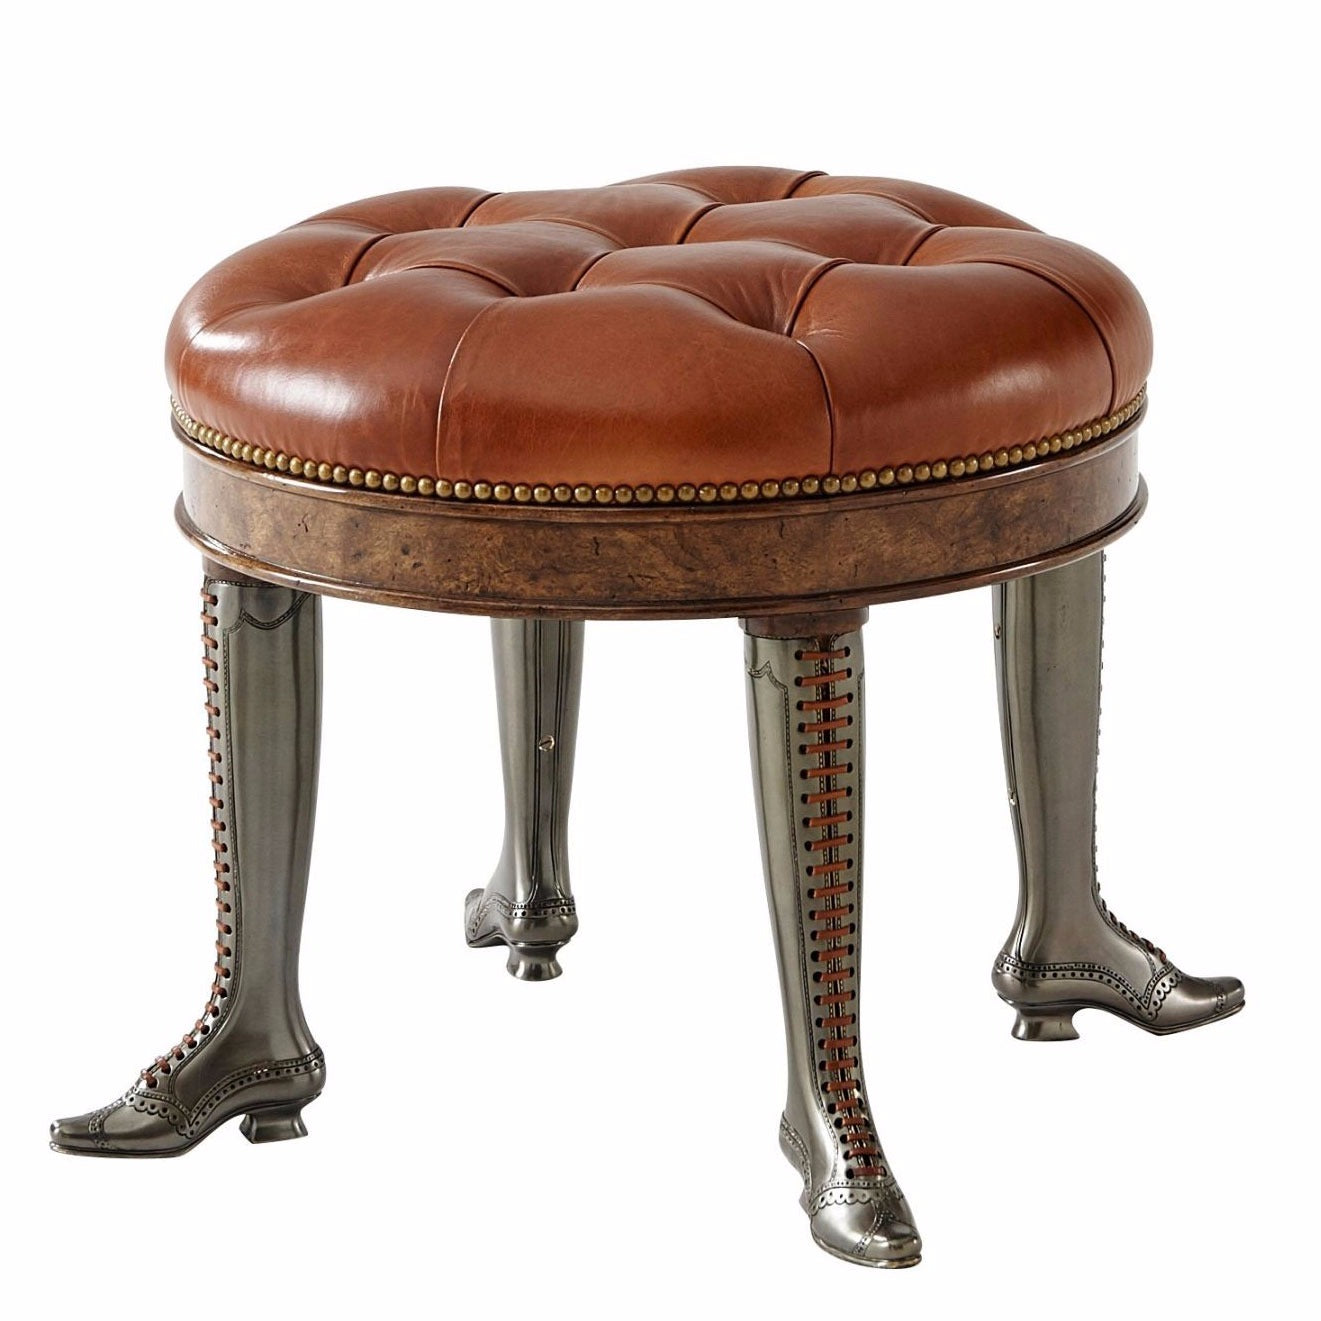 Upholstered Circular Stool with Laced Boot Legs